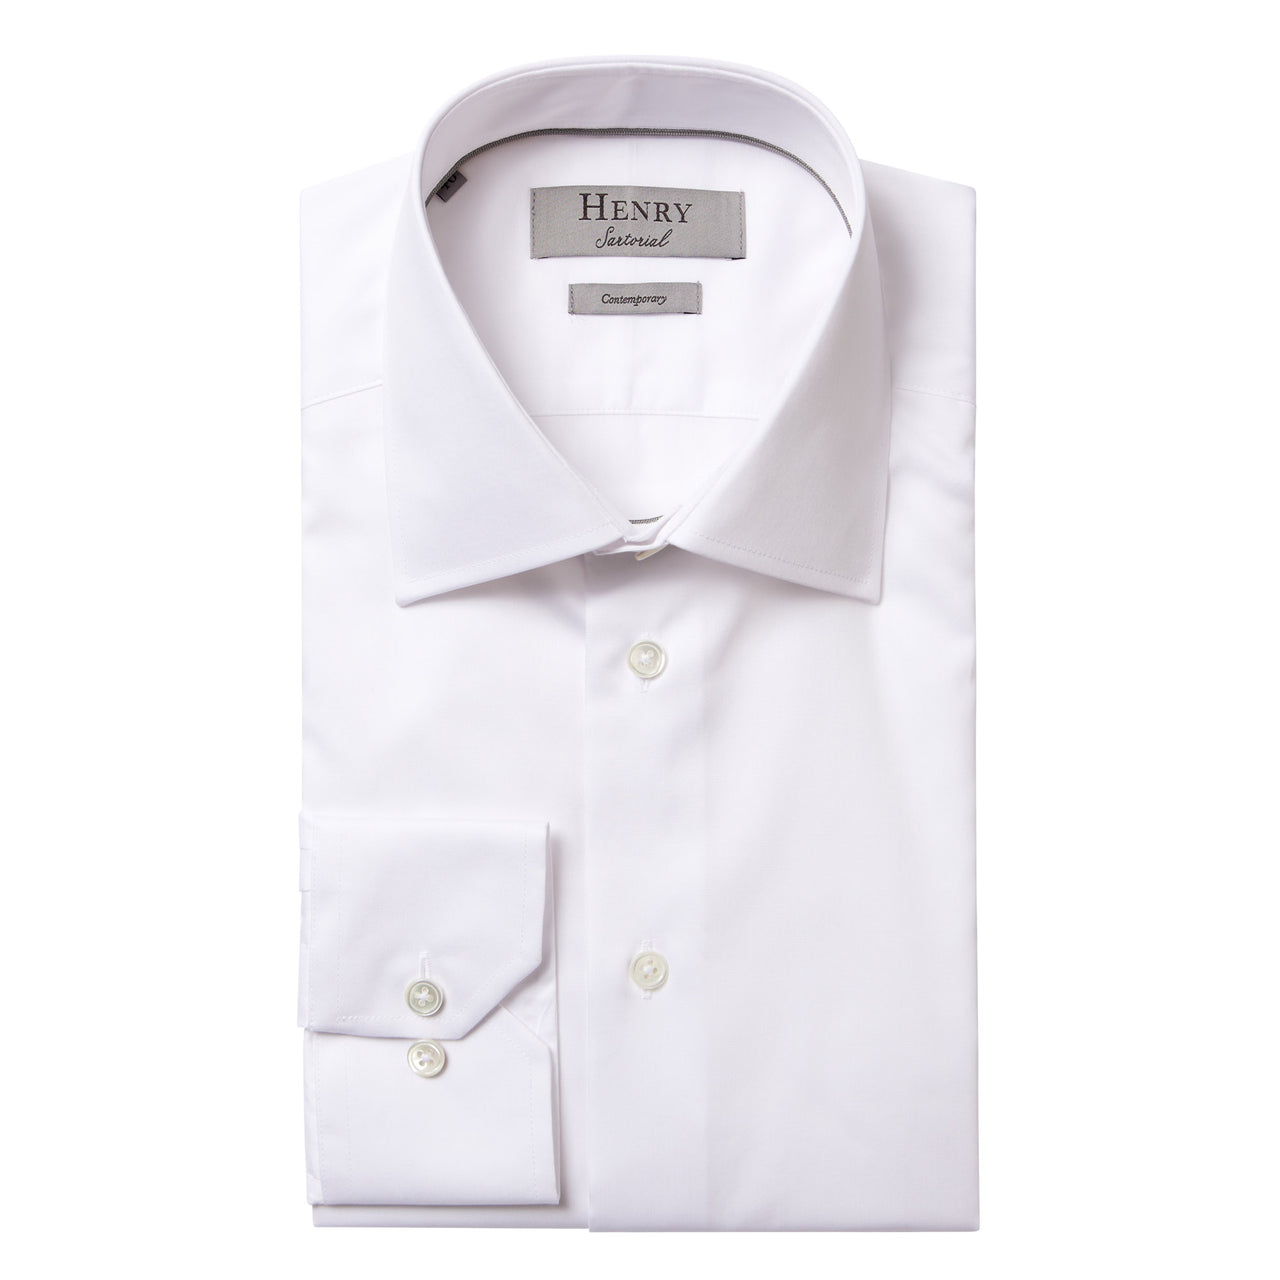 HENRY SARTORIAL Plain Business Shirt Single Cuff Contemporary Fit WHITE